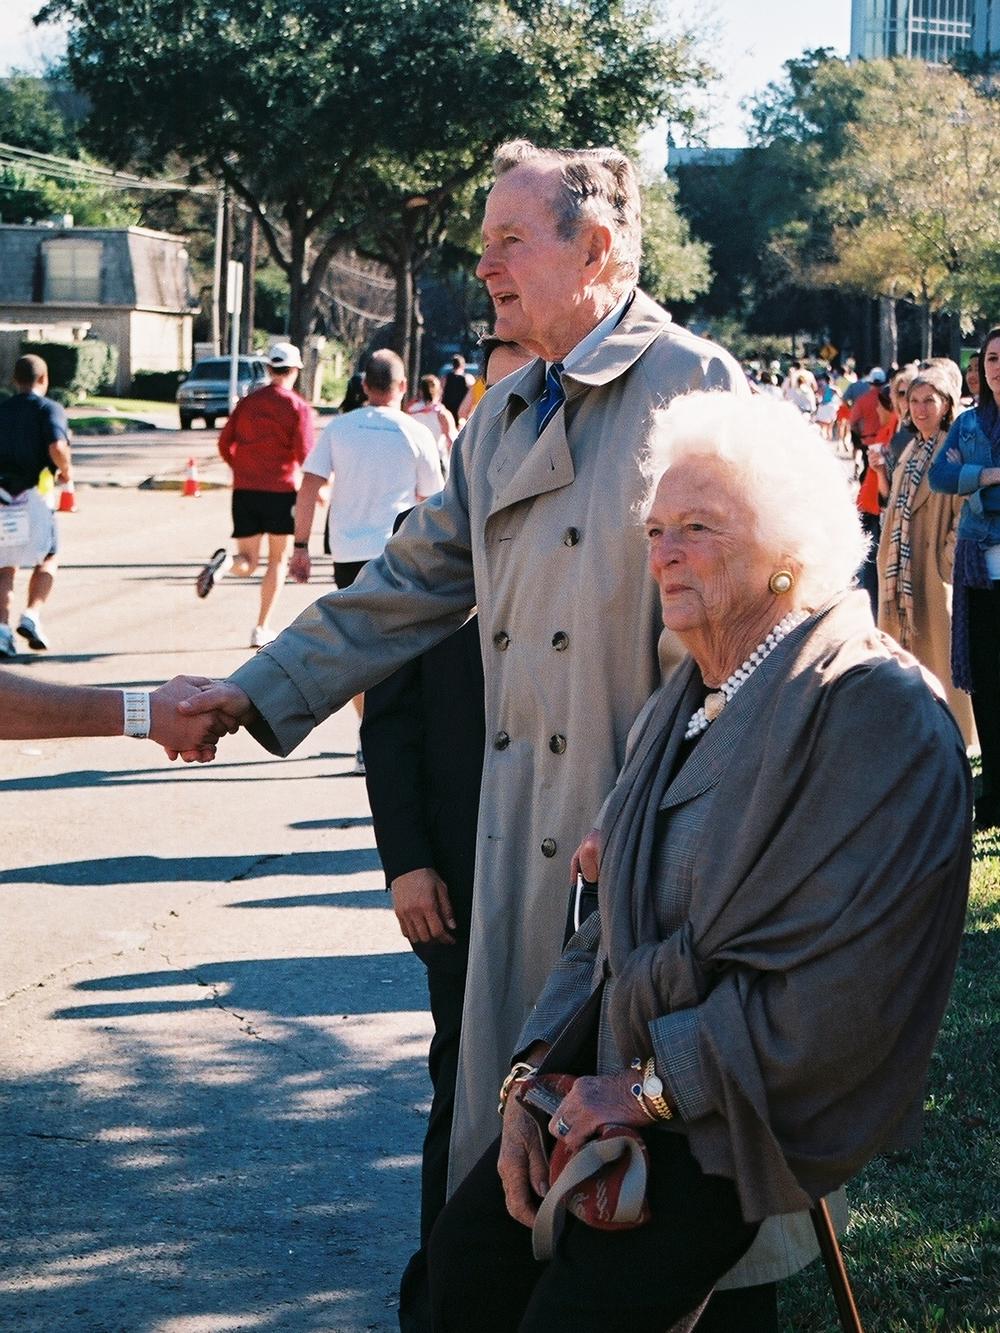 Former president George H.W. Bush and Barbara Bush greet runners participating in the Houston Marathon on Jan. 13, 2008. The route took participants past the Bushes church, St. Martin's Episcopal.